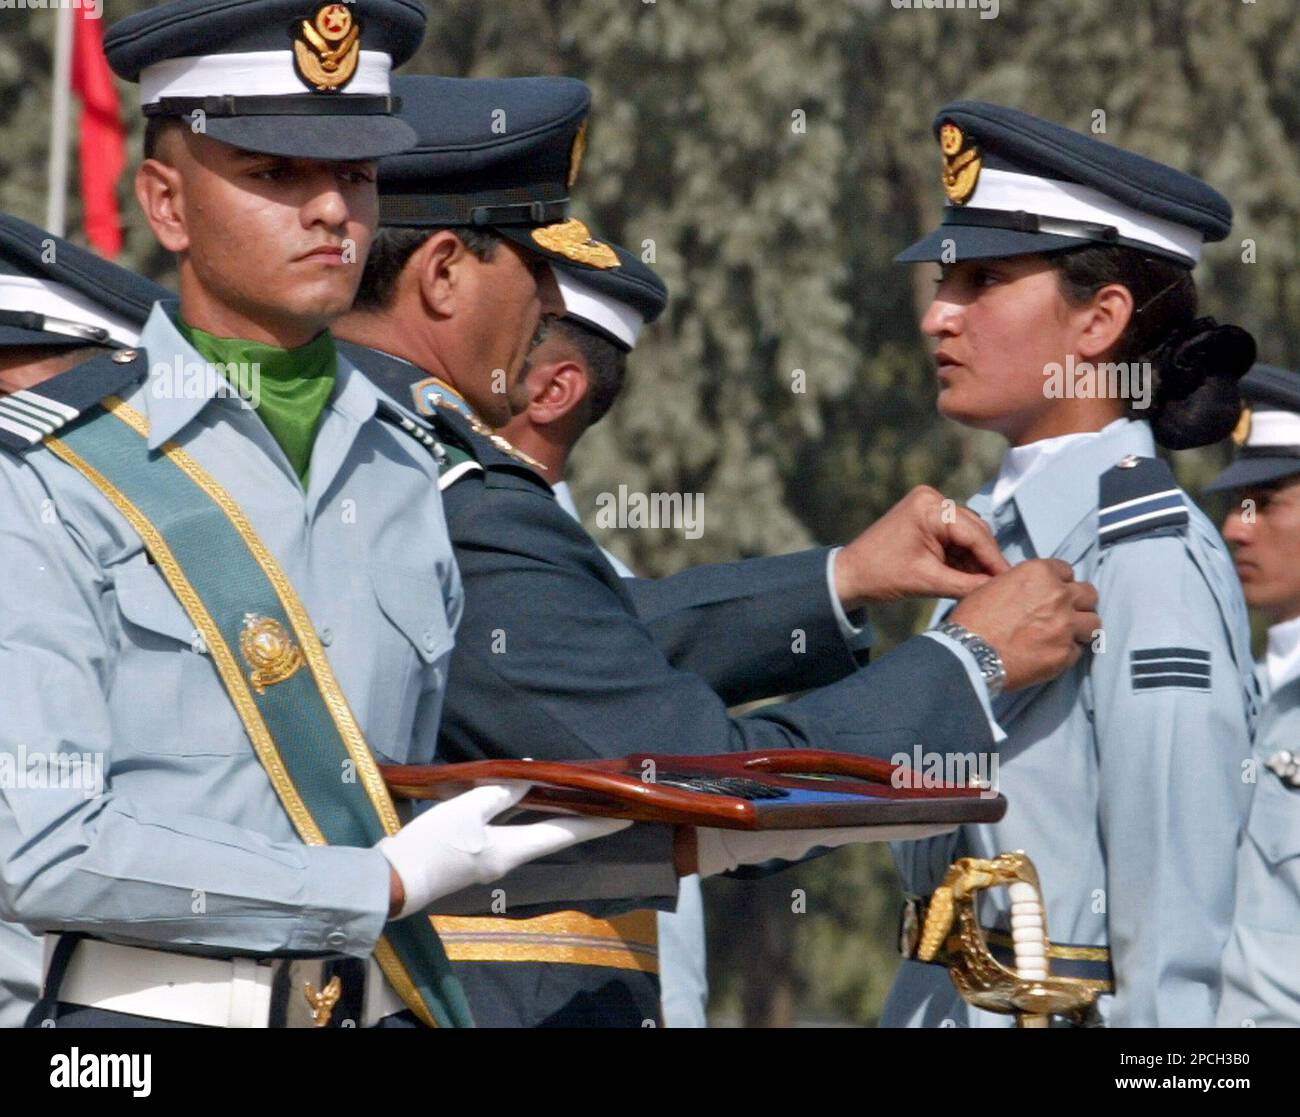 Pakistan Air Force Chief, Air Marshal Tanvir Mahmood Ahmed, center, decorates the flying-badges to an woman flying officer Sahira Amin, right, during a pass-out parade at Pakistan Air Force Base in Risalpur